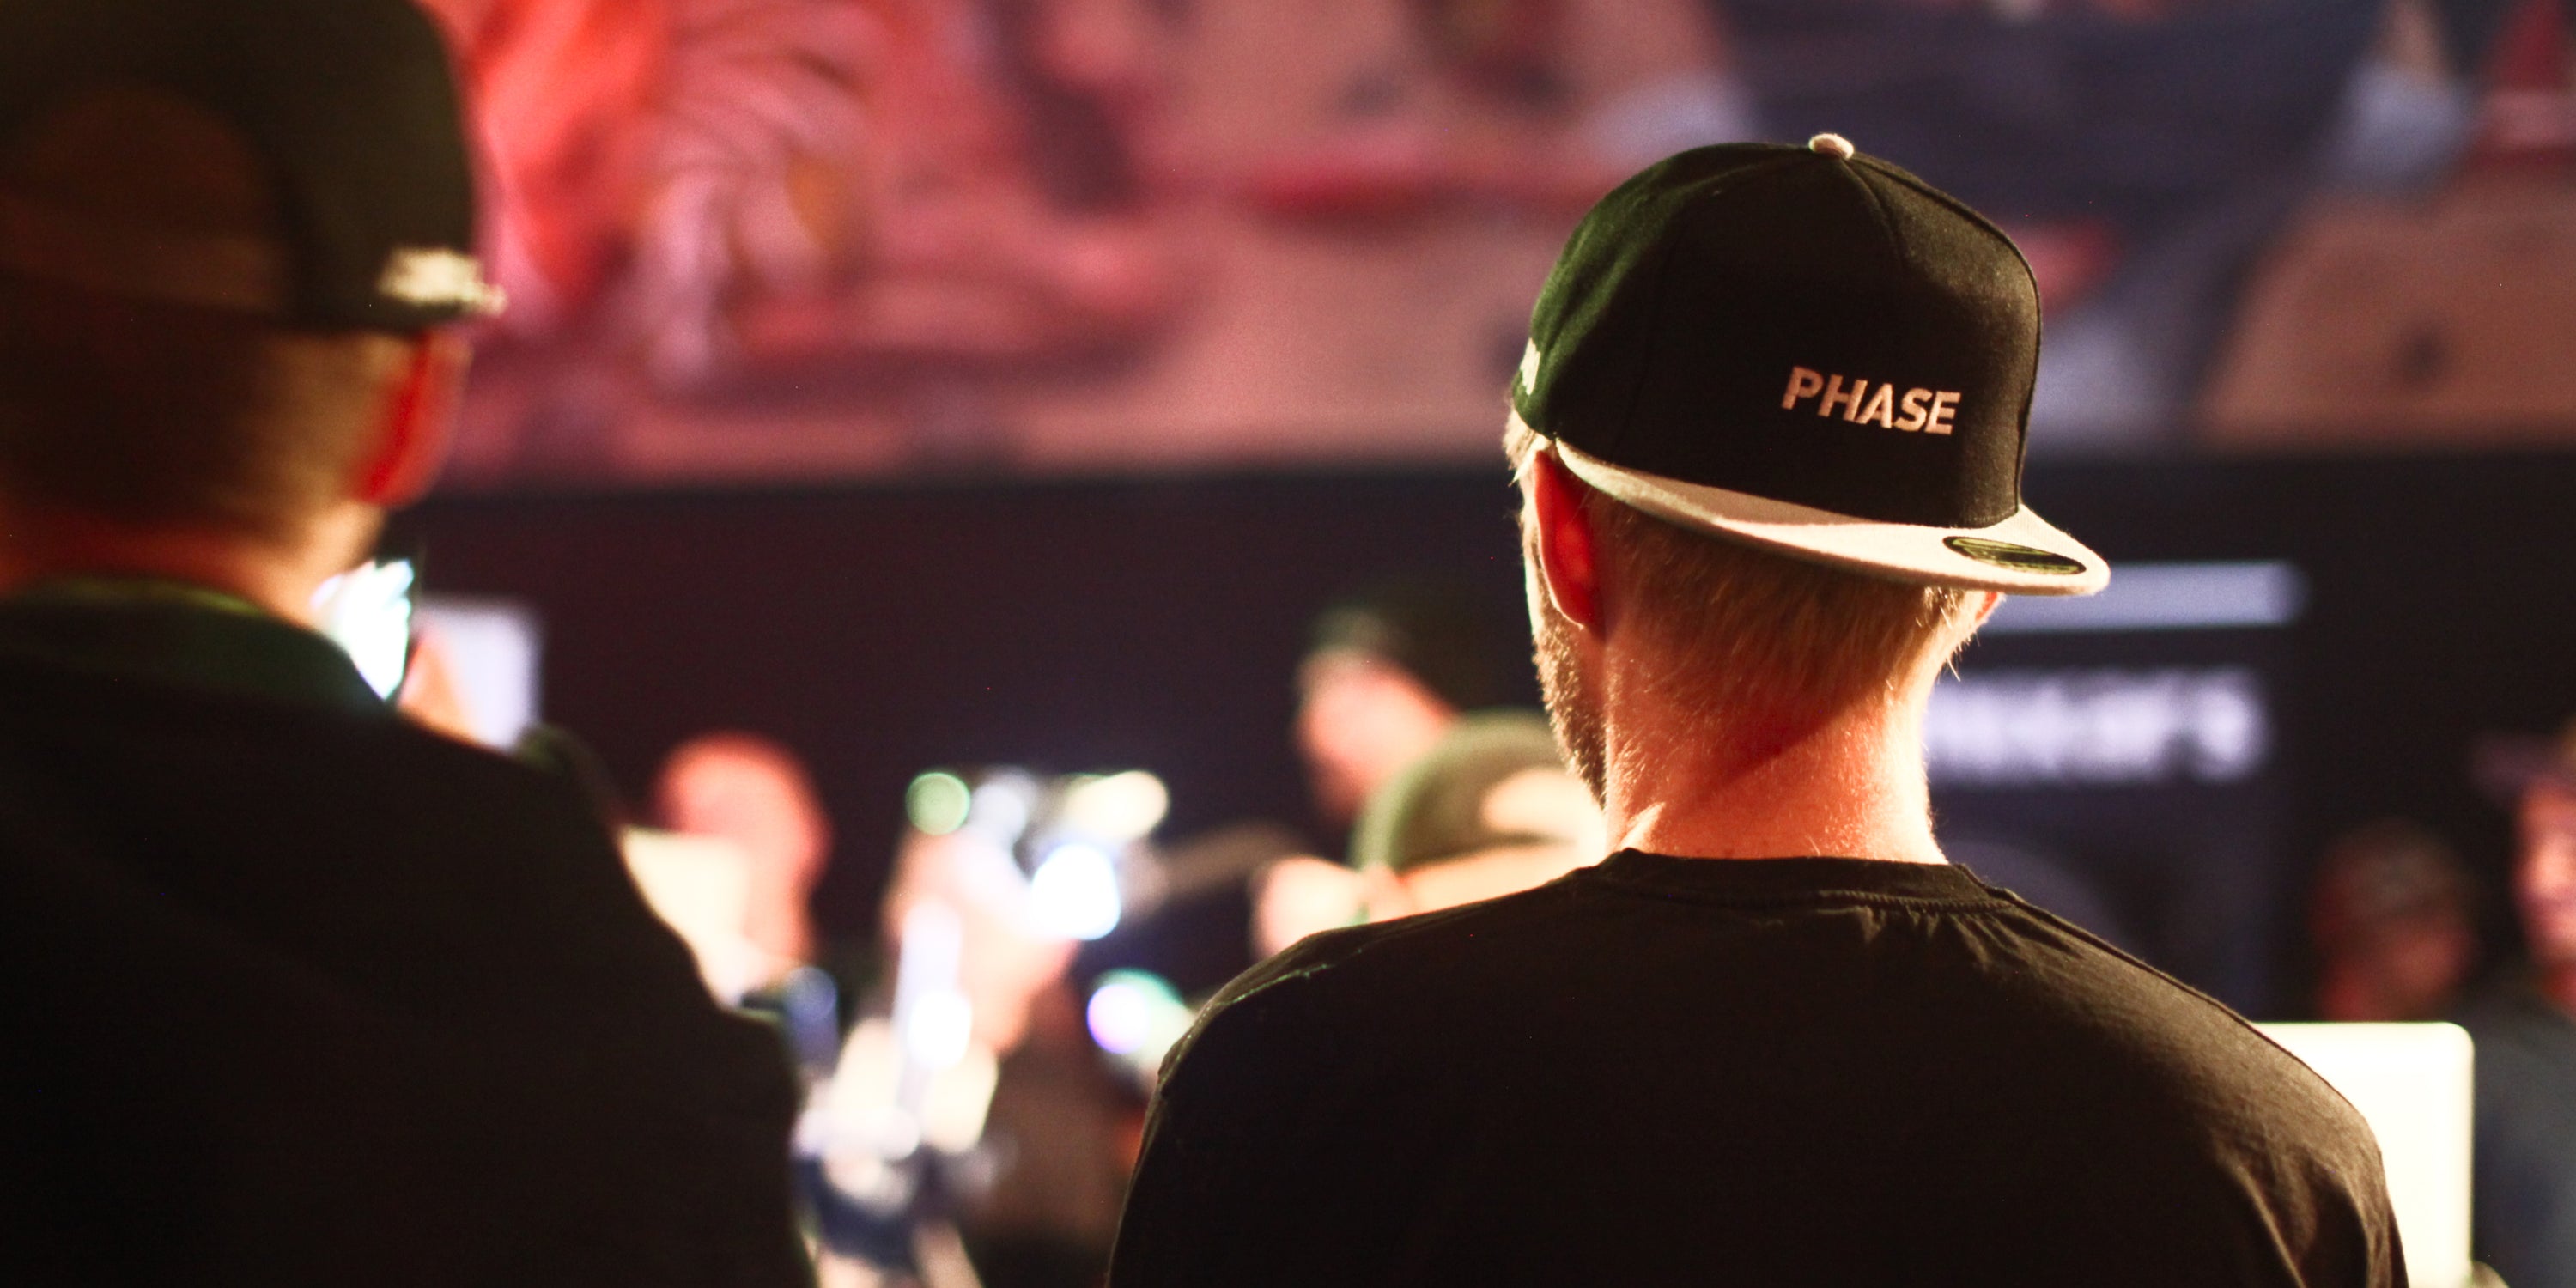 a Phase team member wearing a Phase hat